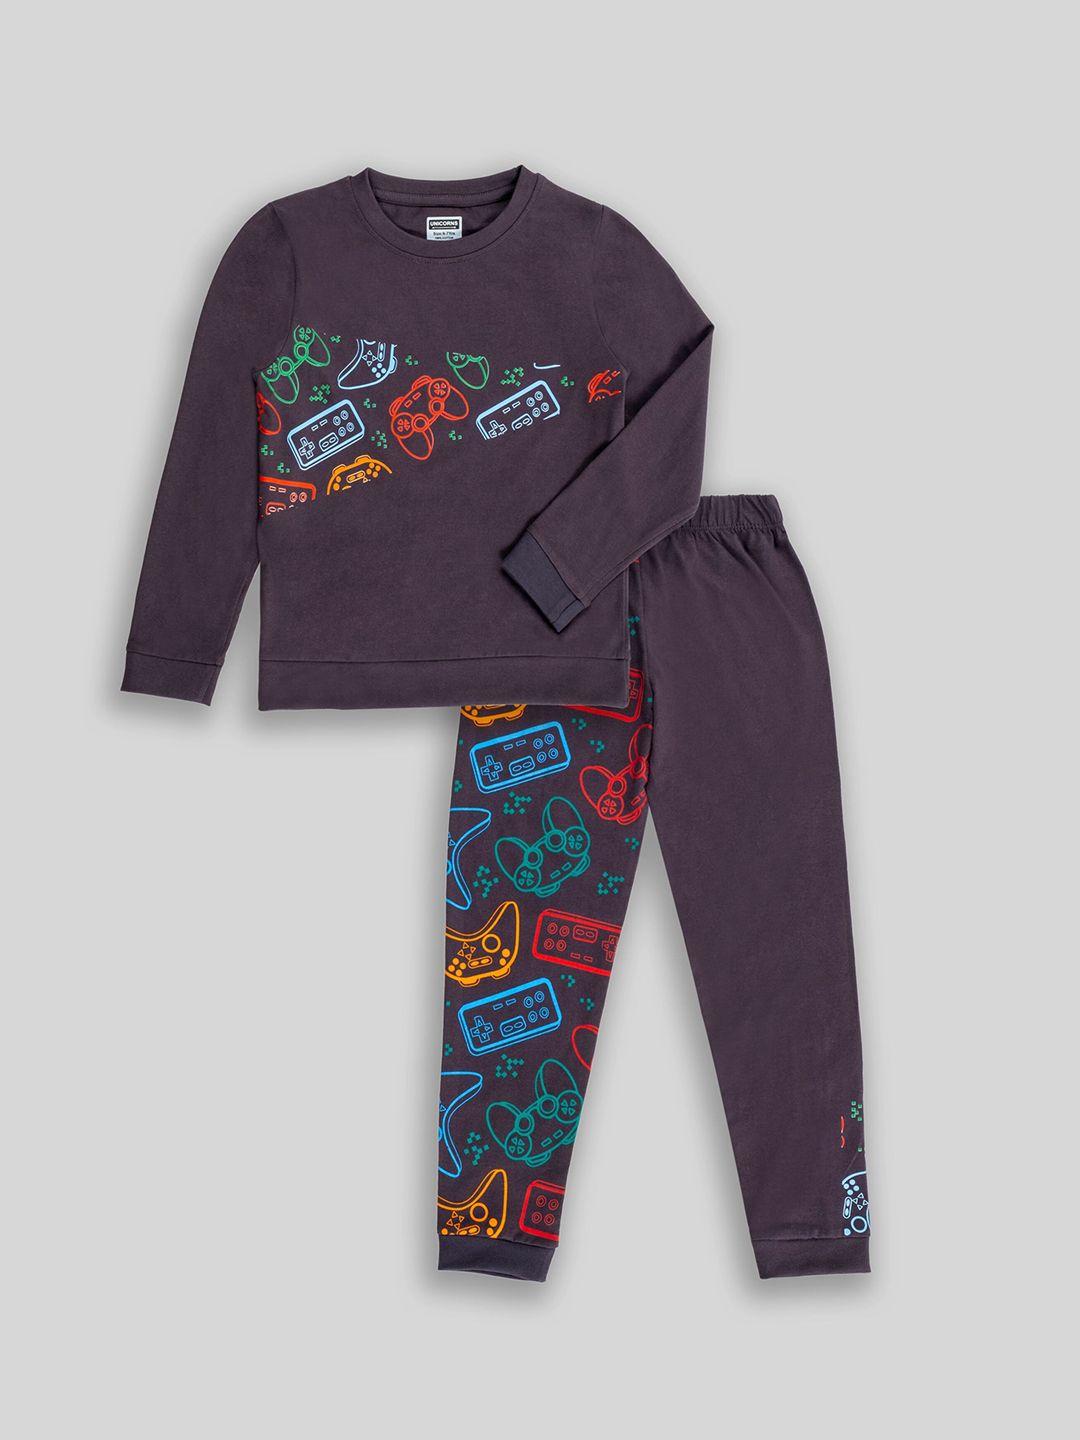 baesd kids printed pure cotton night suits